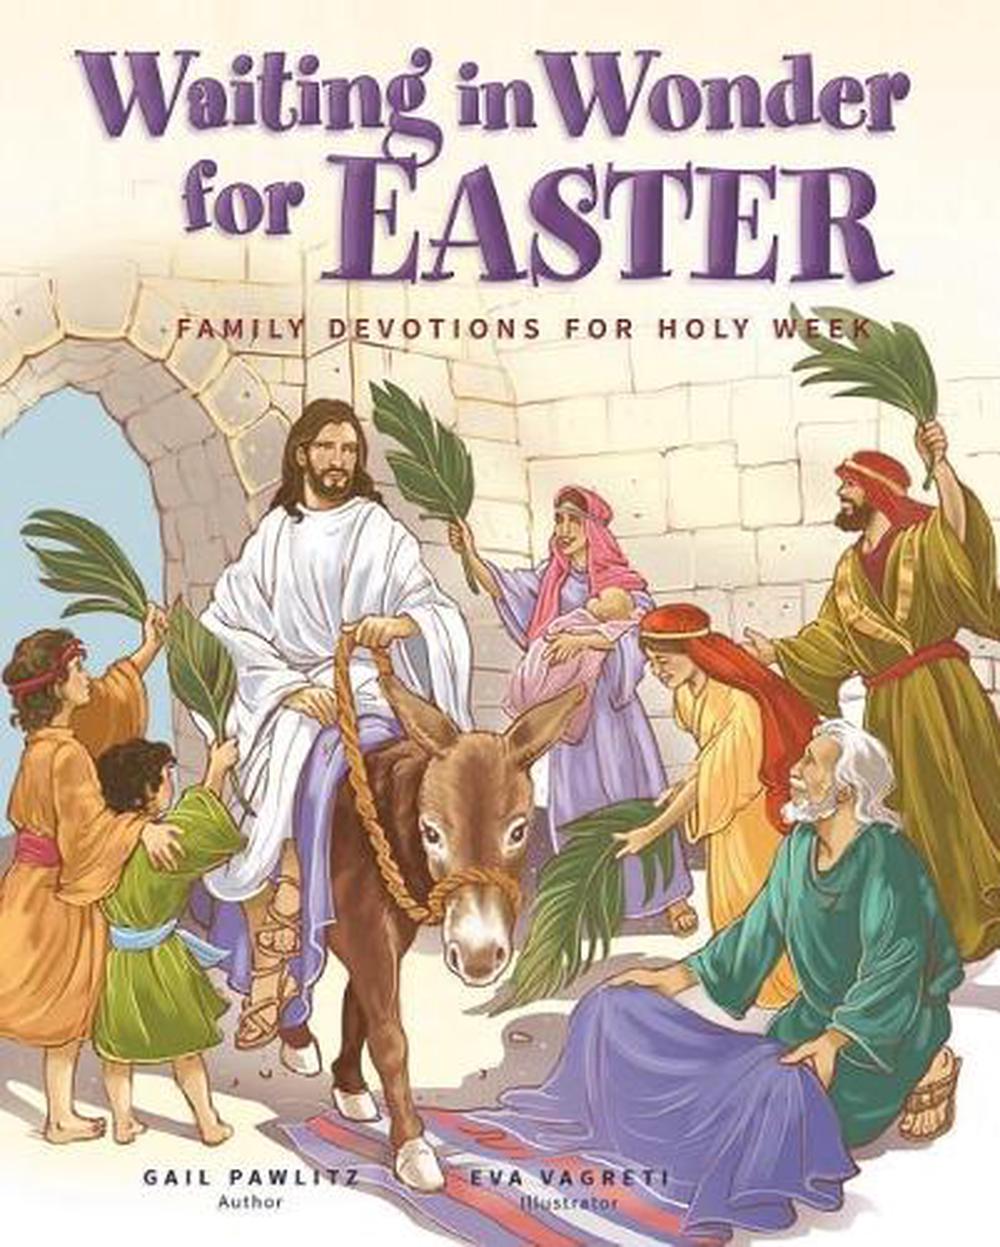 Waiting in Wonder for Easter Family Devotions for Holy Week by Gail